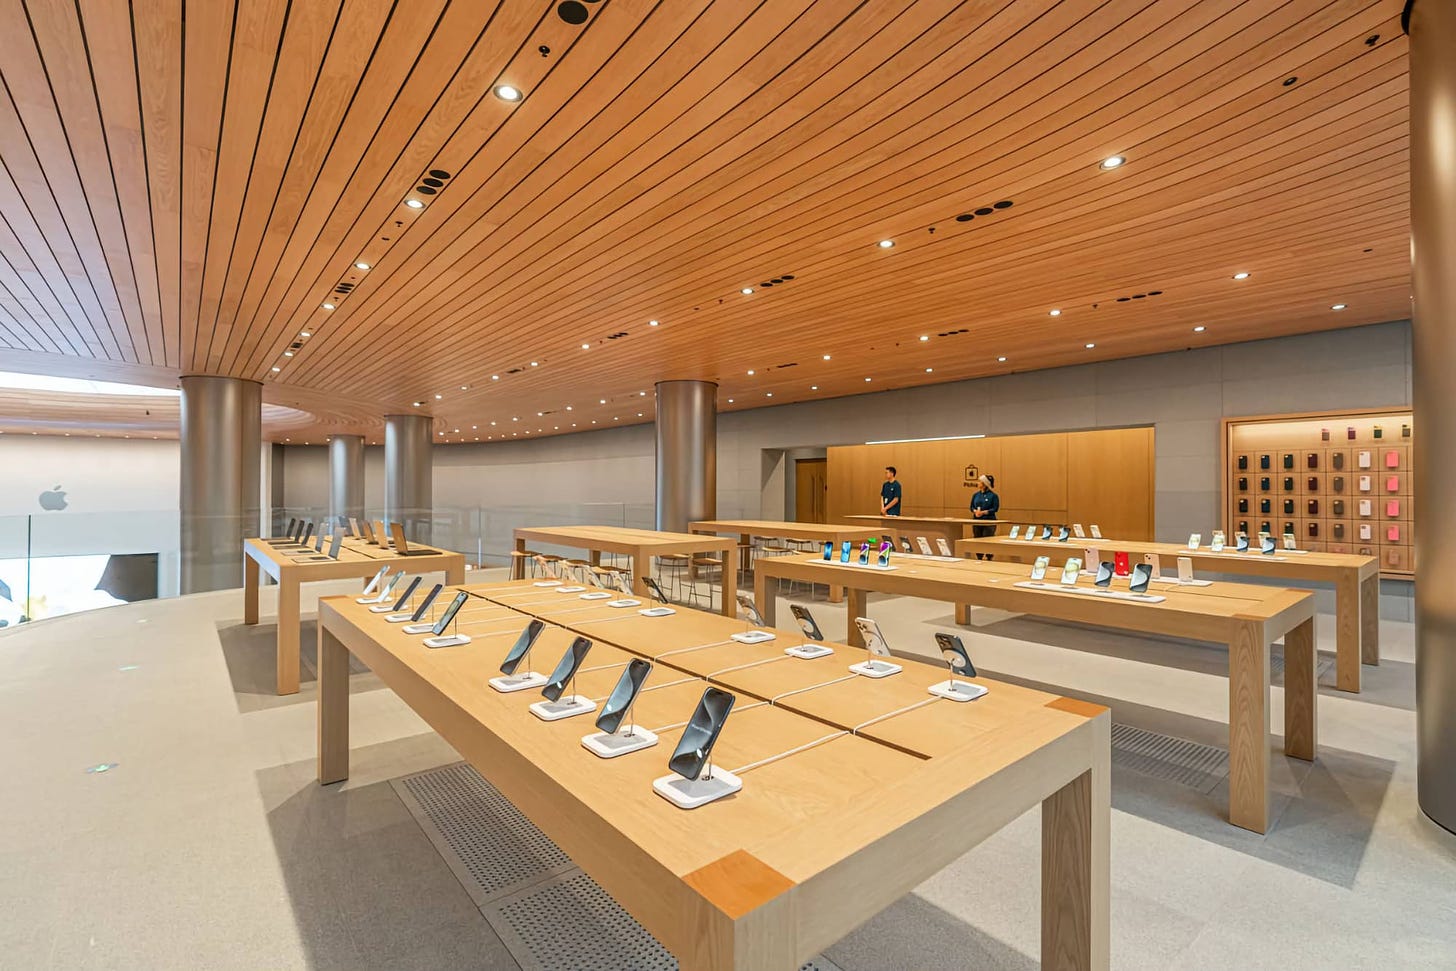 The plaza level at Apple Jingan. The ceiling is low and the Apple Pickup counter is nestled in an alcove.